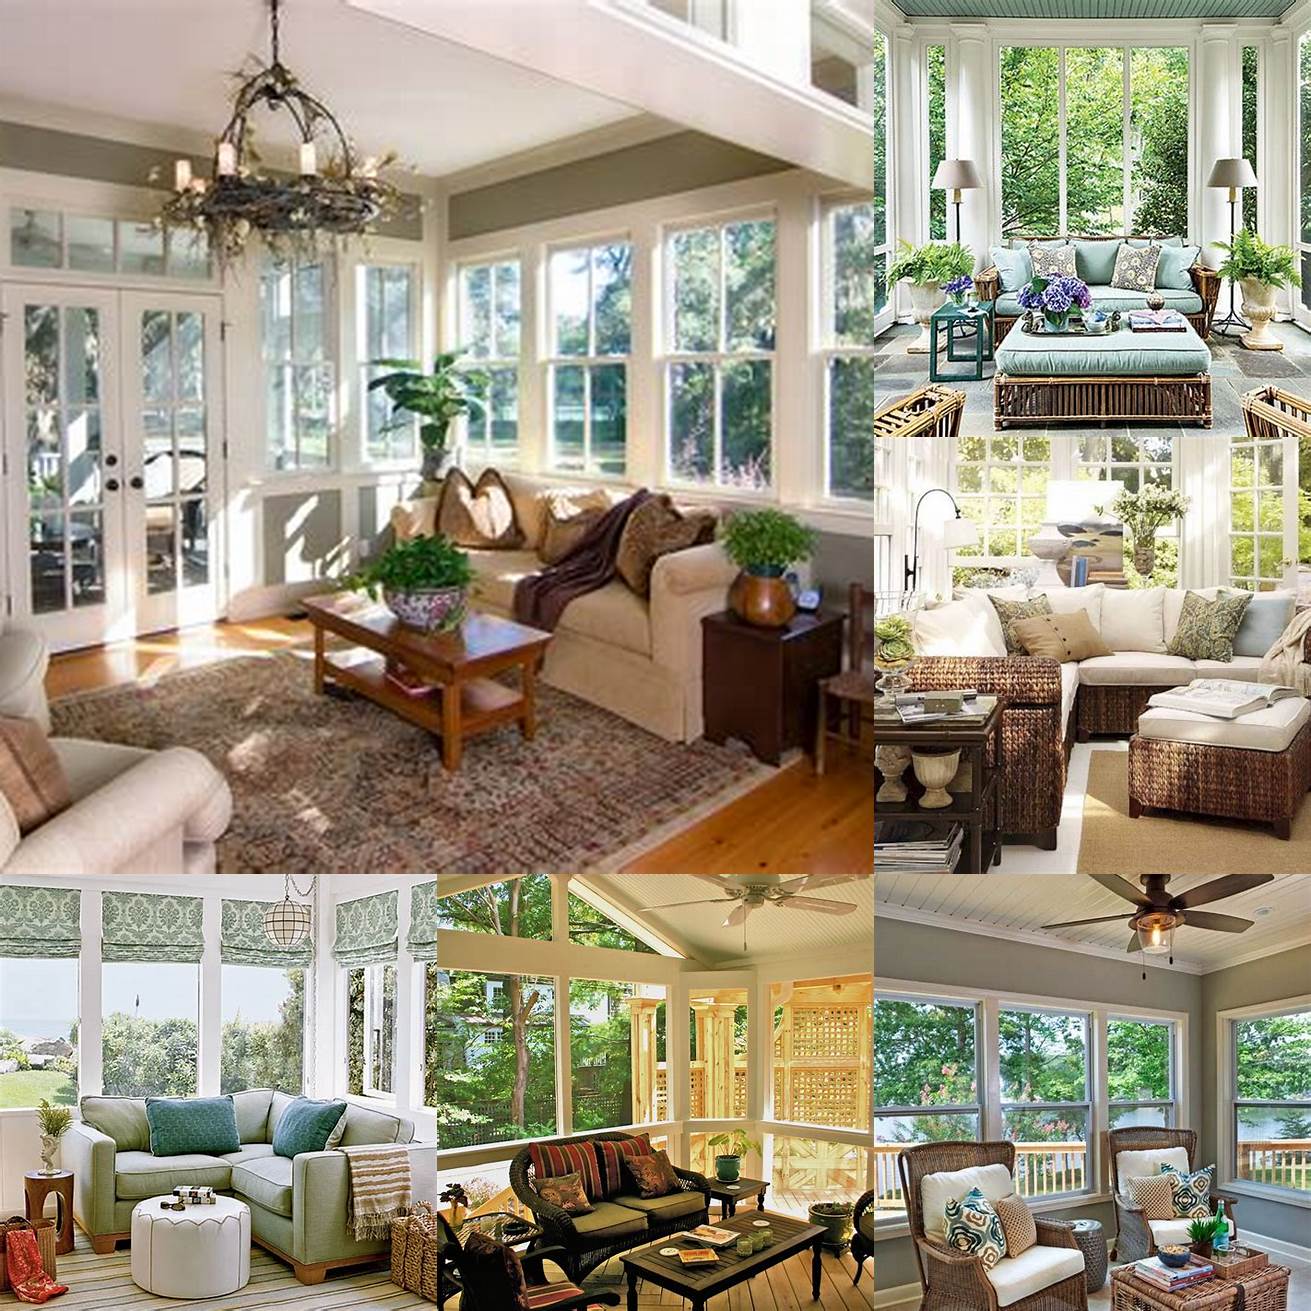 A shot of the furniture in a sunroom